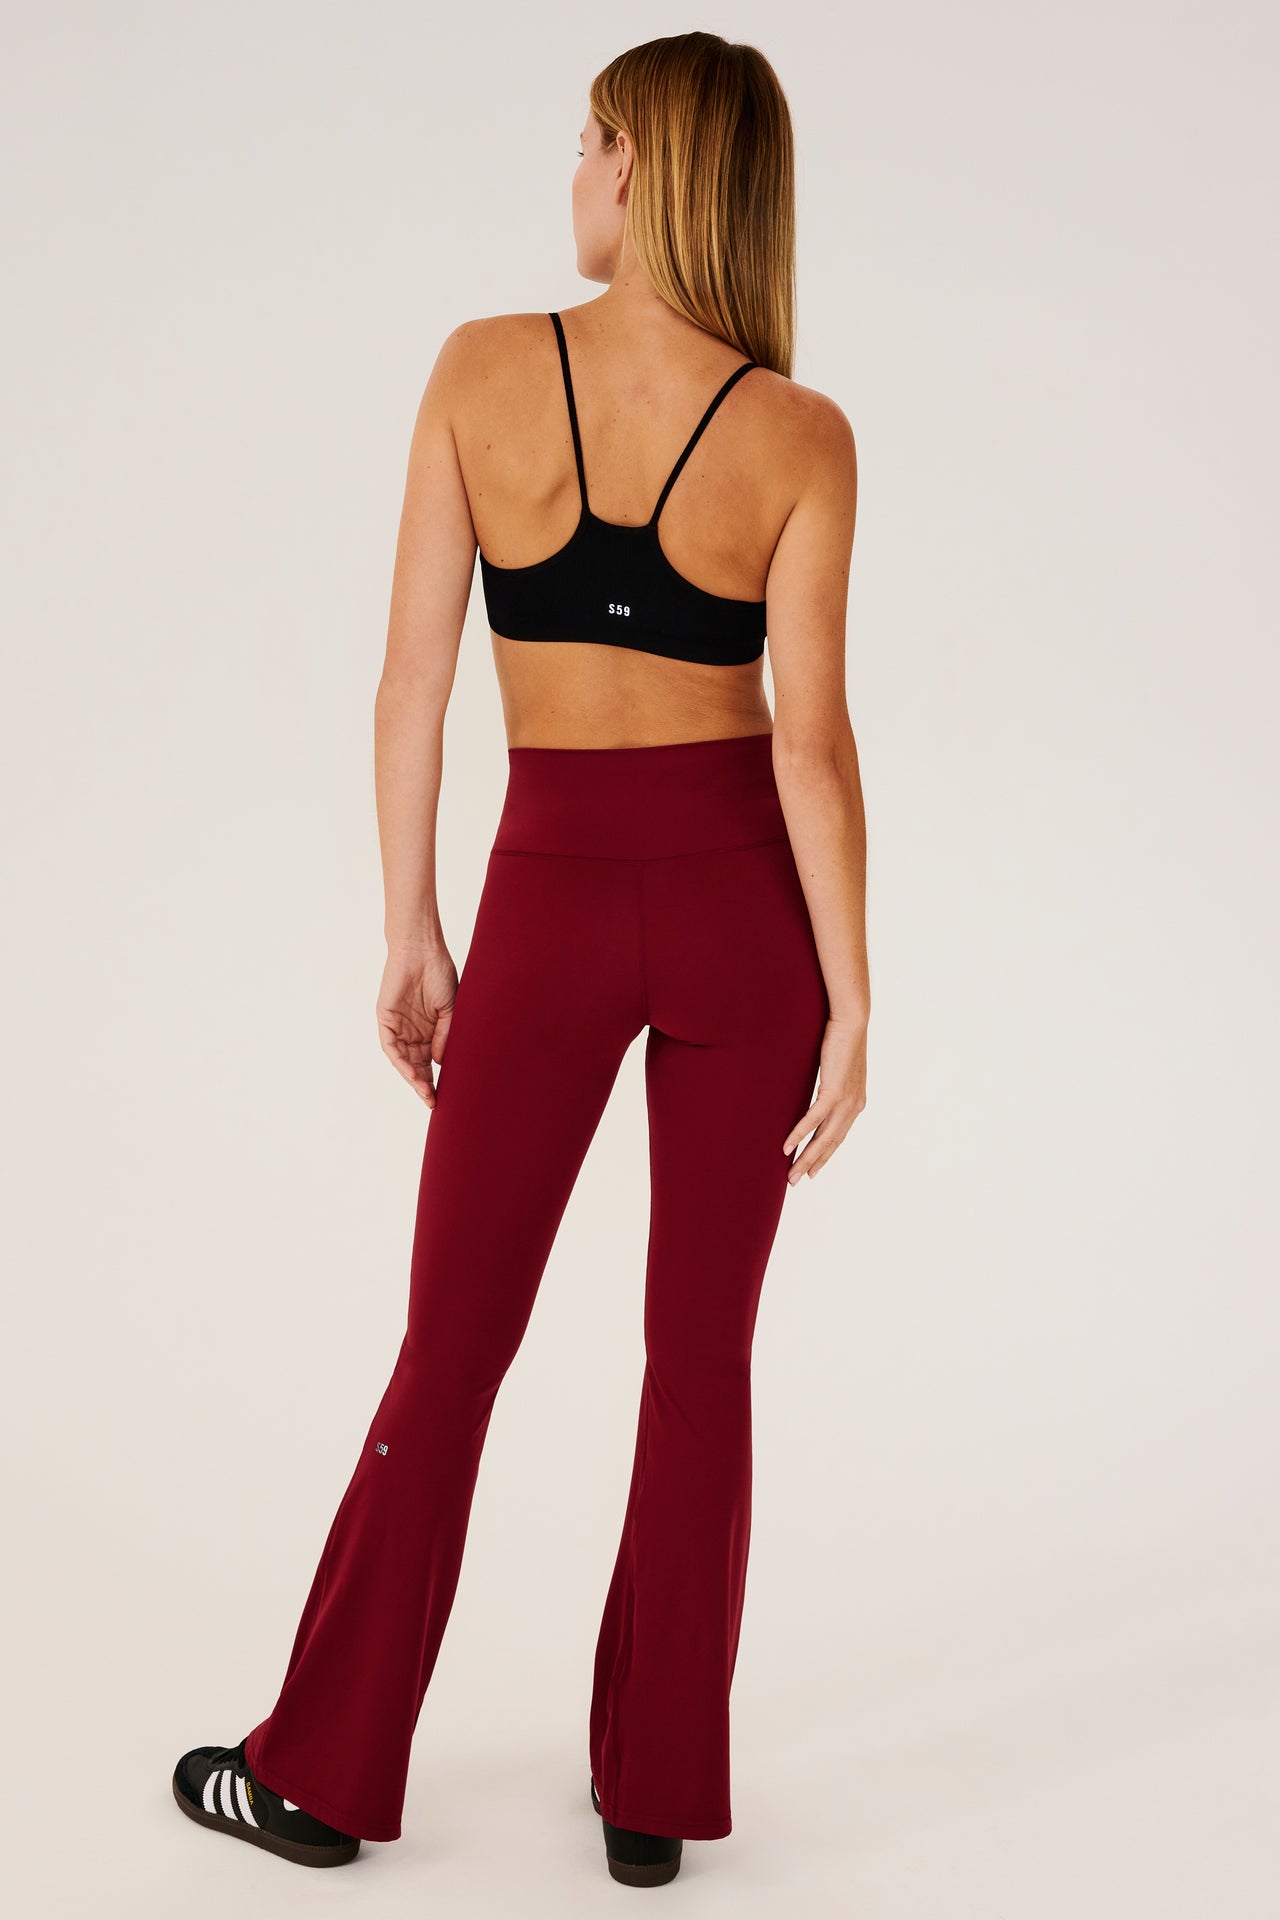 Full back view of woman with straight blonde hair wearing a dark red high waist below ankle length legging with wide flared bottoms with black S59 logo on back of left calf and black racerback bra with spaghetti straps and white S59 logo. Paired with black shoes with white stripes. 